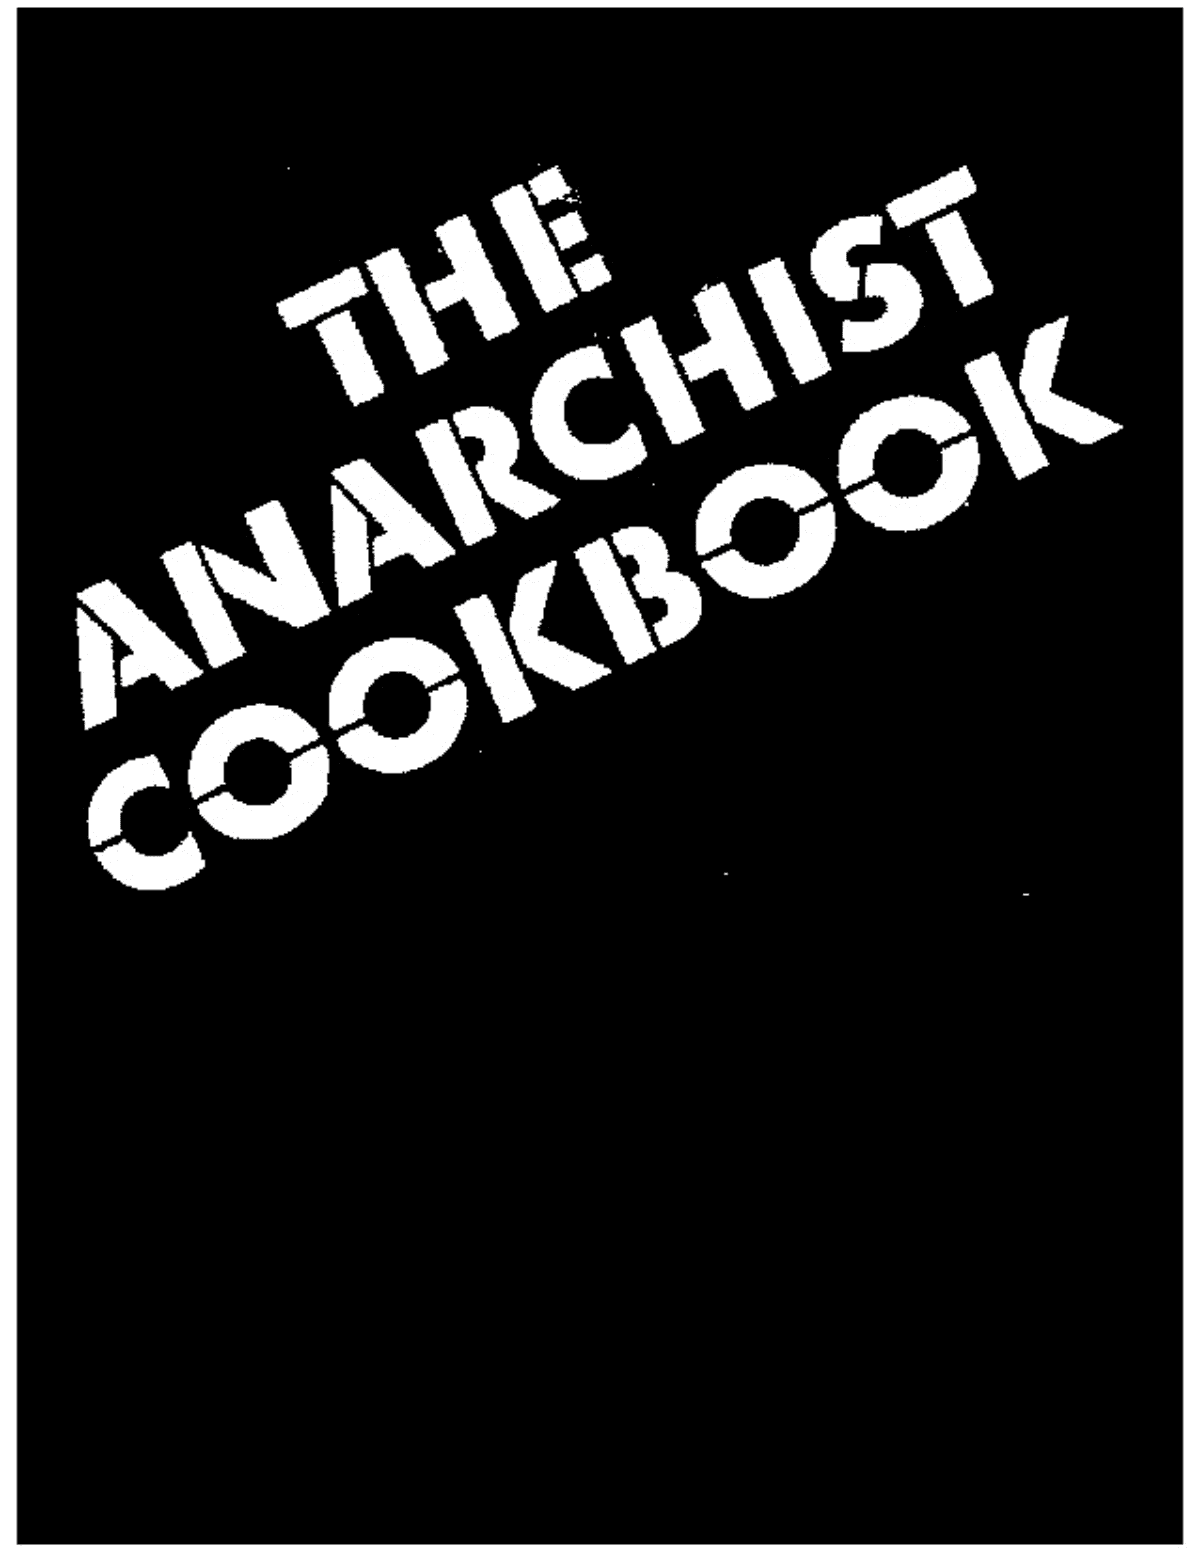 The Anarchist Cookbook #37